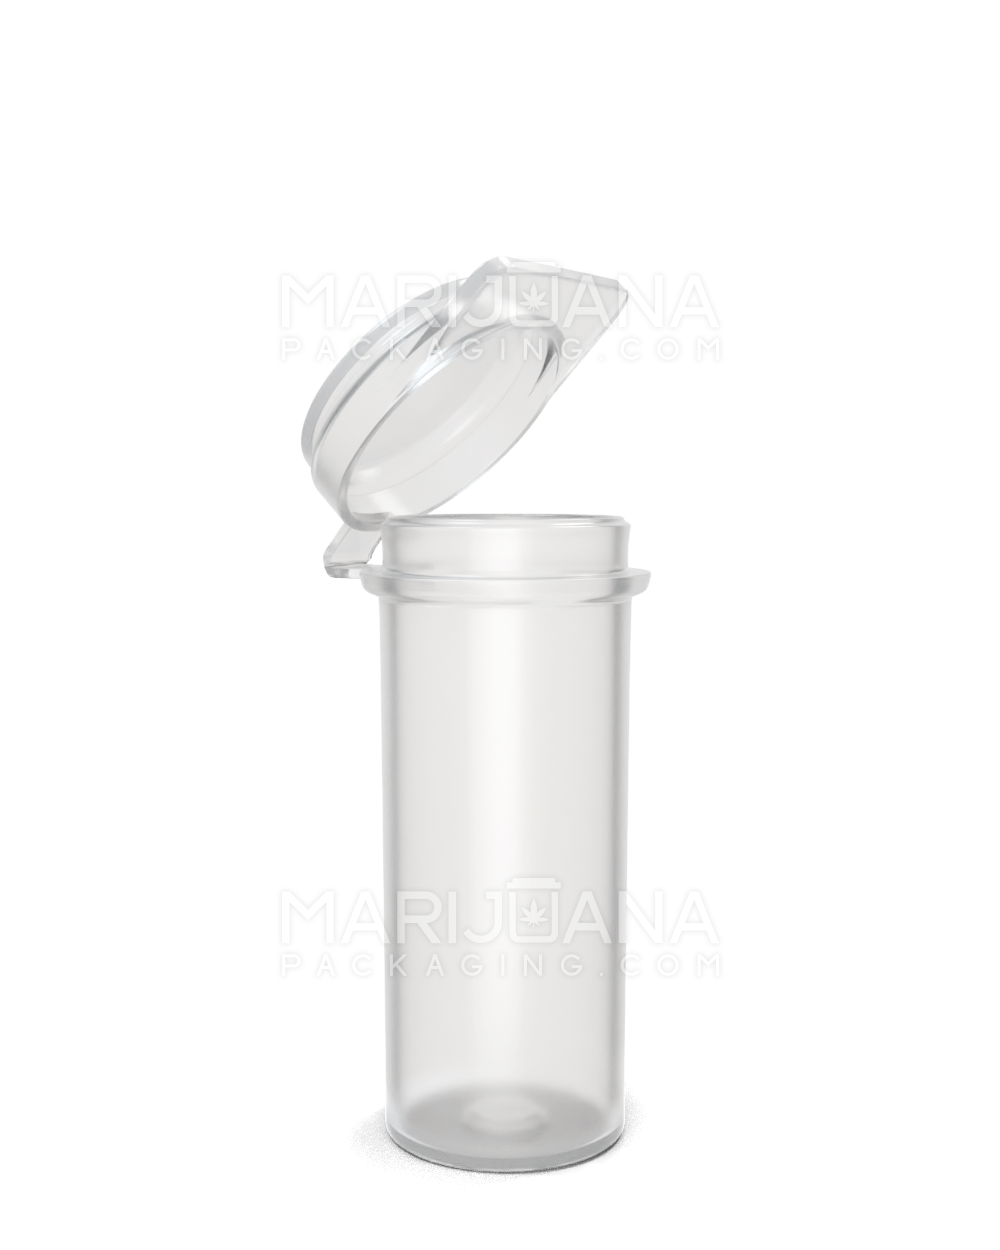 Hinged Lid Pop Top Plastic Seed Container Vial | 9 Dram - Clear - 600 Count - 1